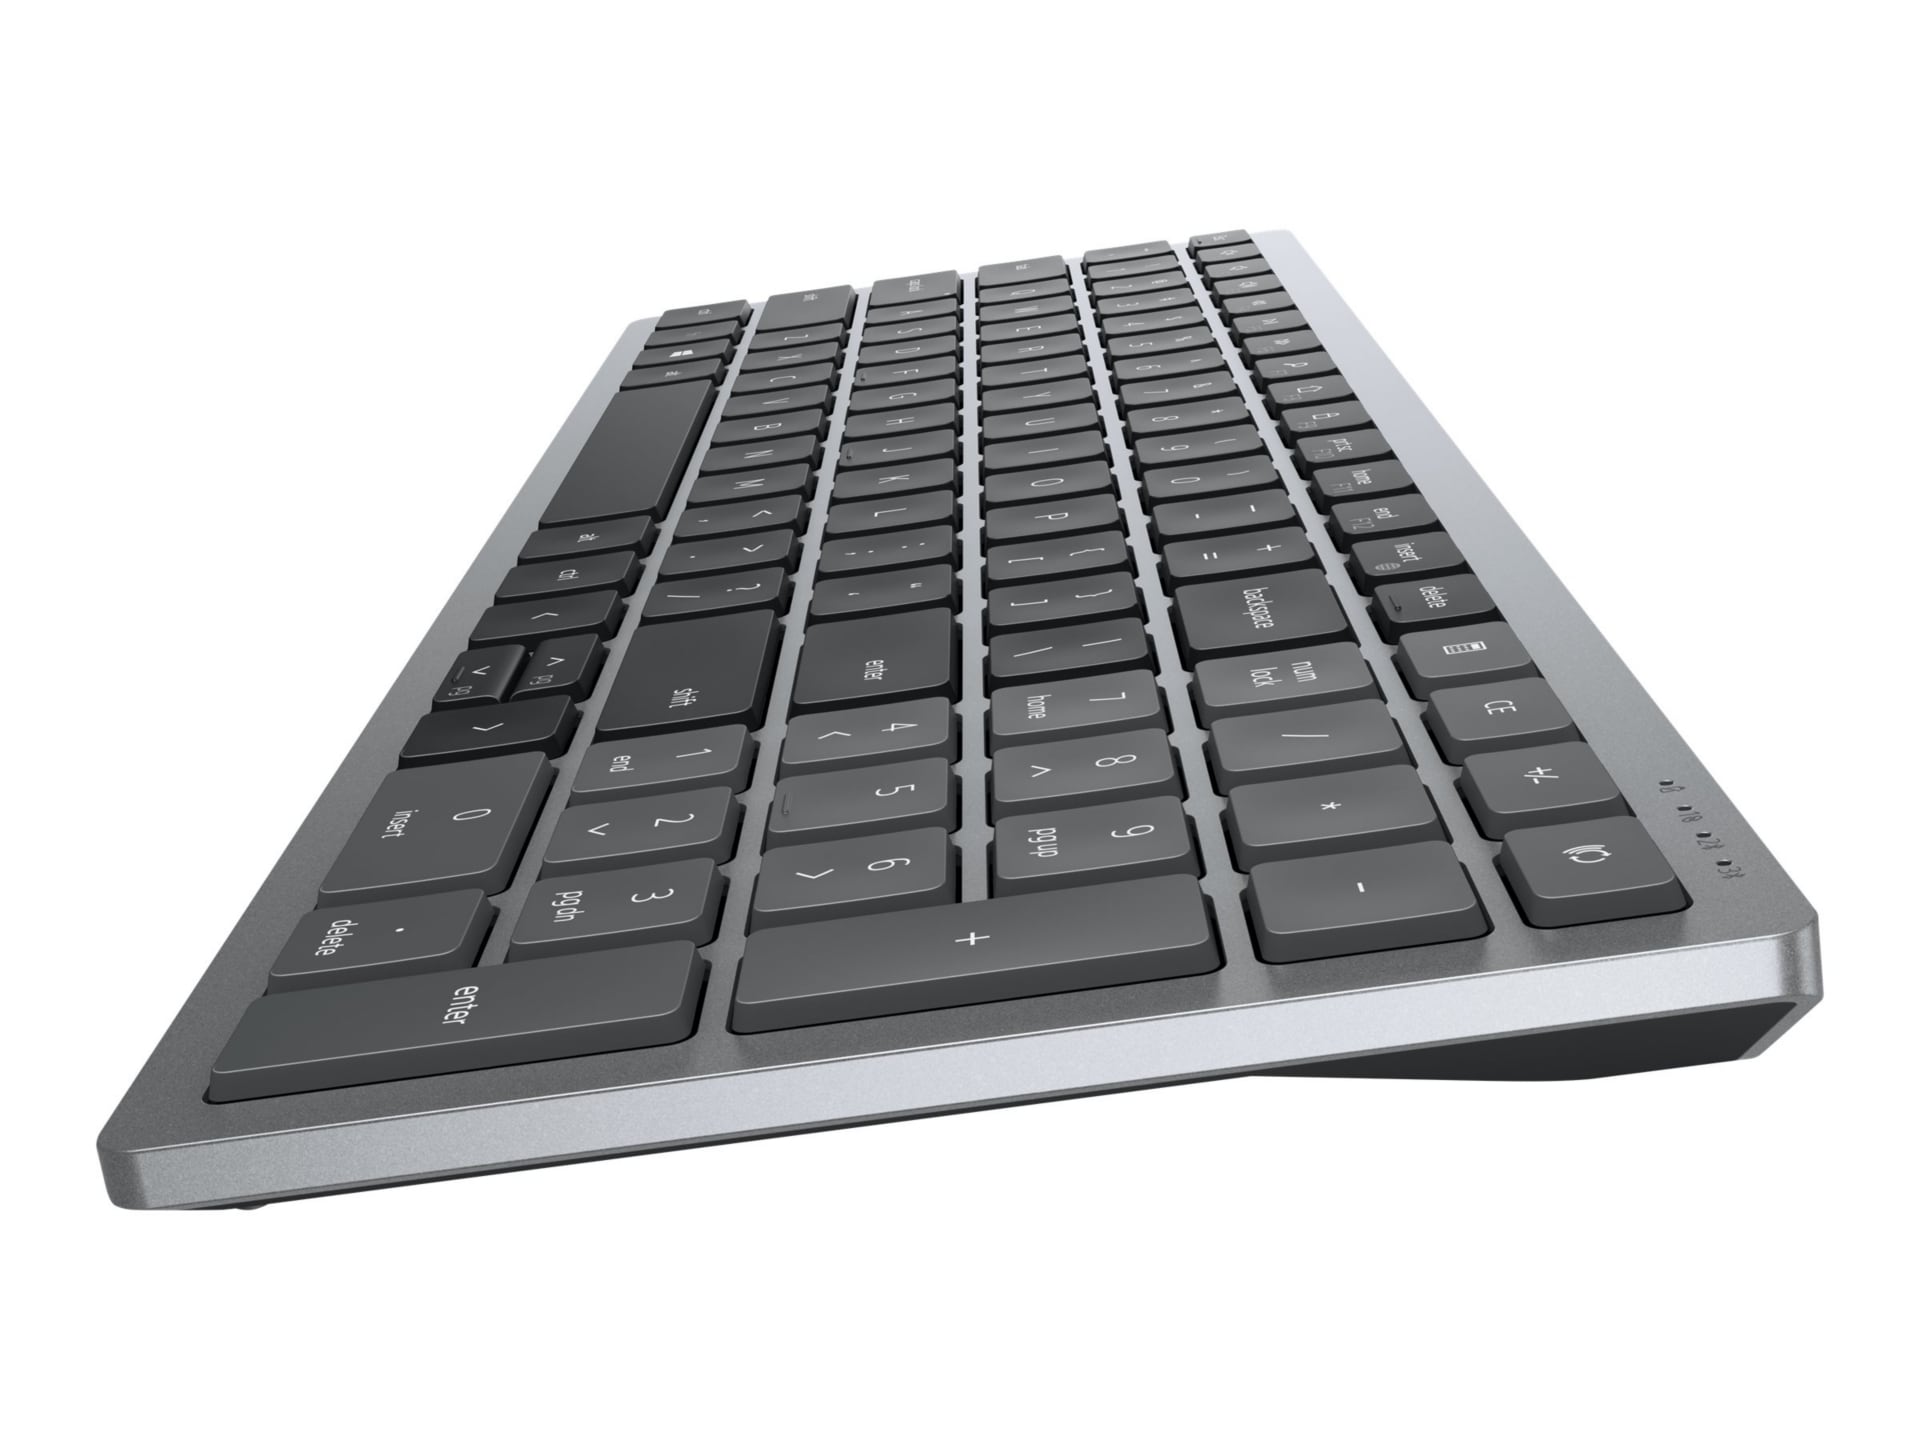 Dell Multi-Device KM7120W - keyboard and mouse set - titan gray Input Devic